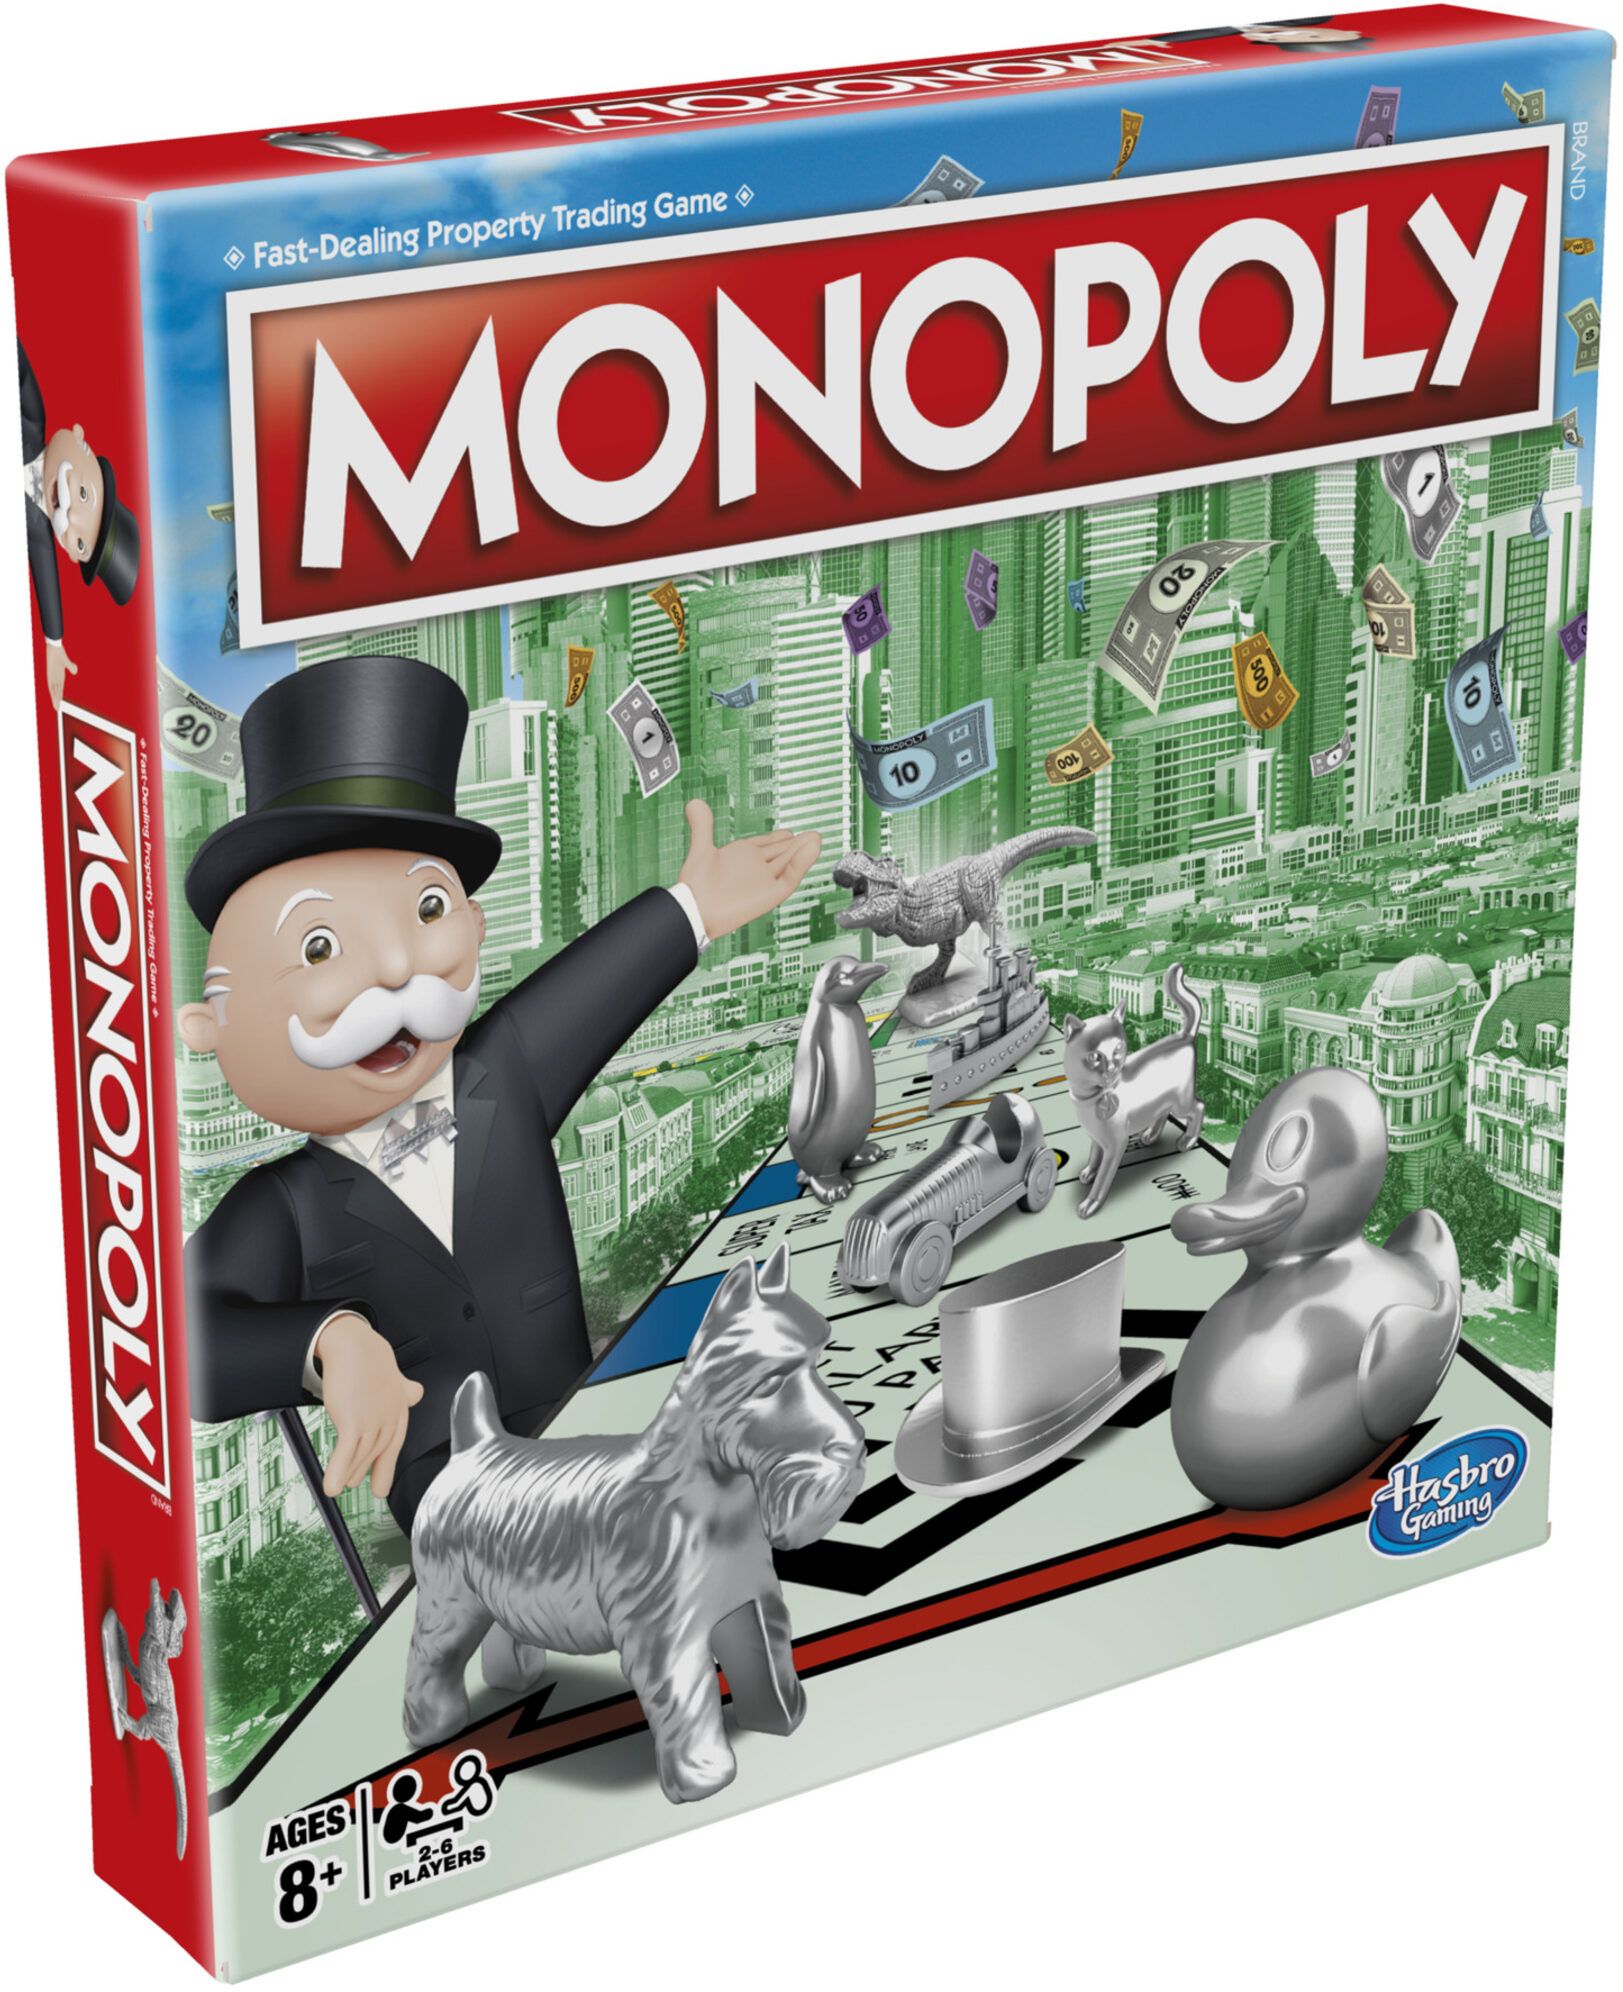 Monopoly classic - hasbro games - the toy room